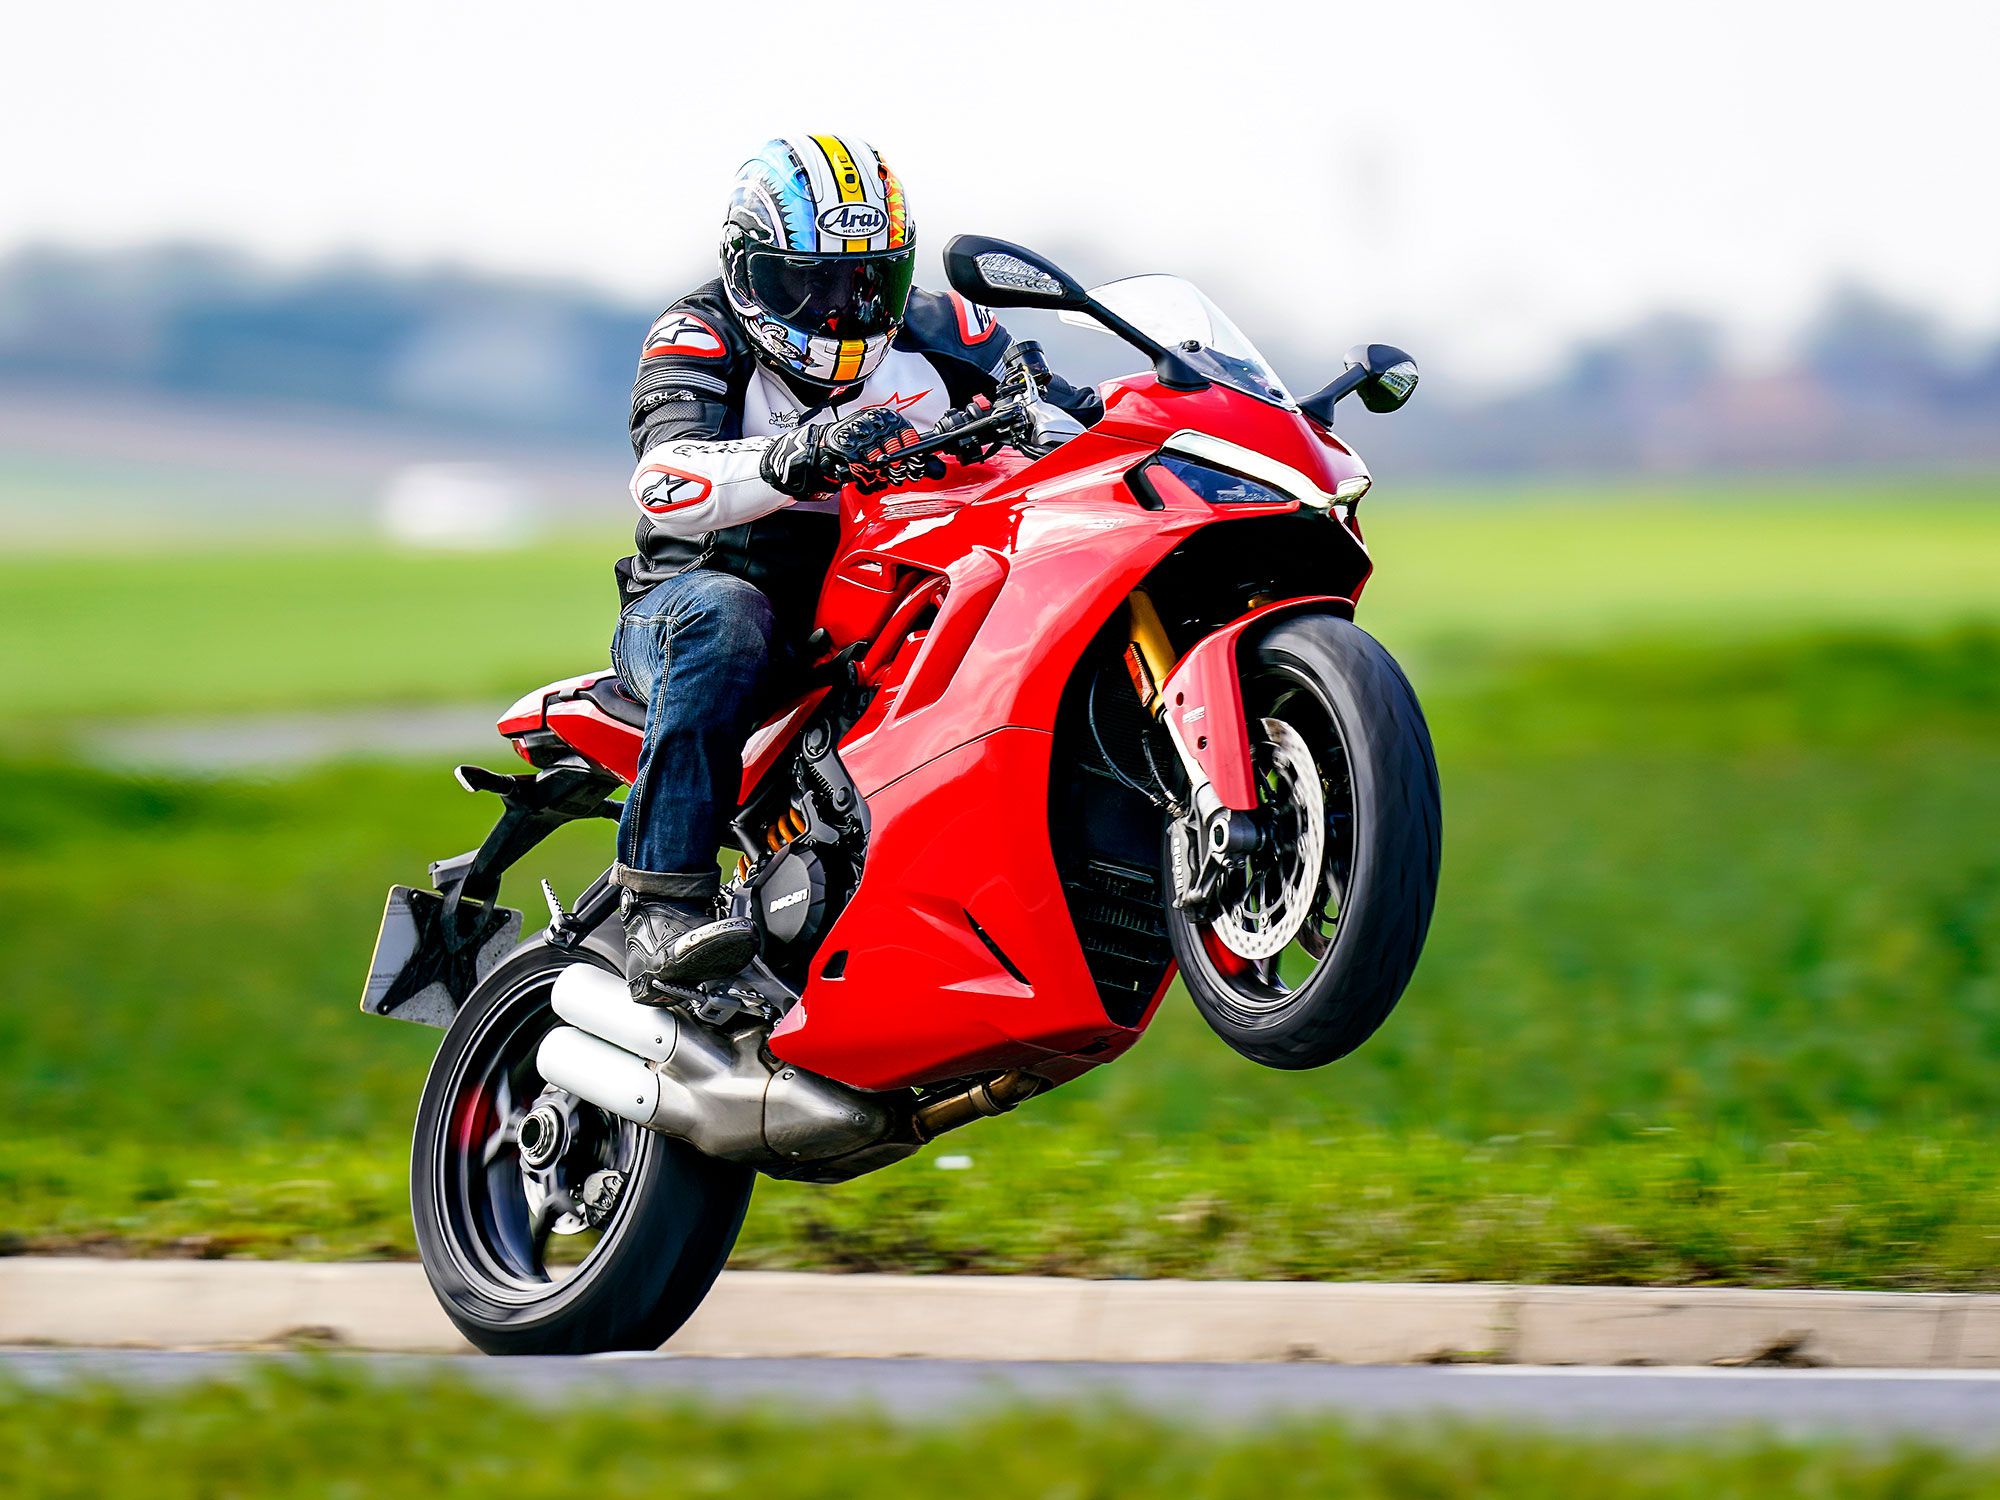 The bodywork and style are completely new, now featuring full-LED headlight with Daytime Running Light (DRL). The styling isn’t just for aesthetic reasons, to bring it in line with the Panigale family, but also deflects warm engine air away from the rider.